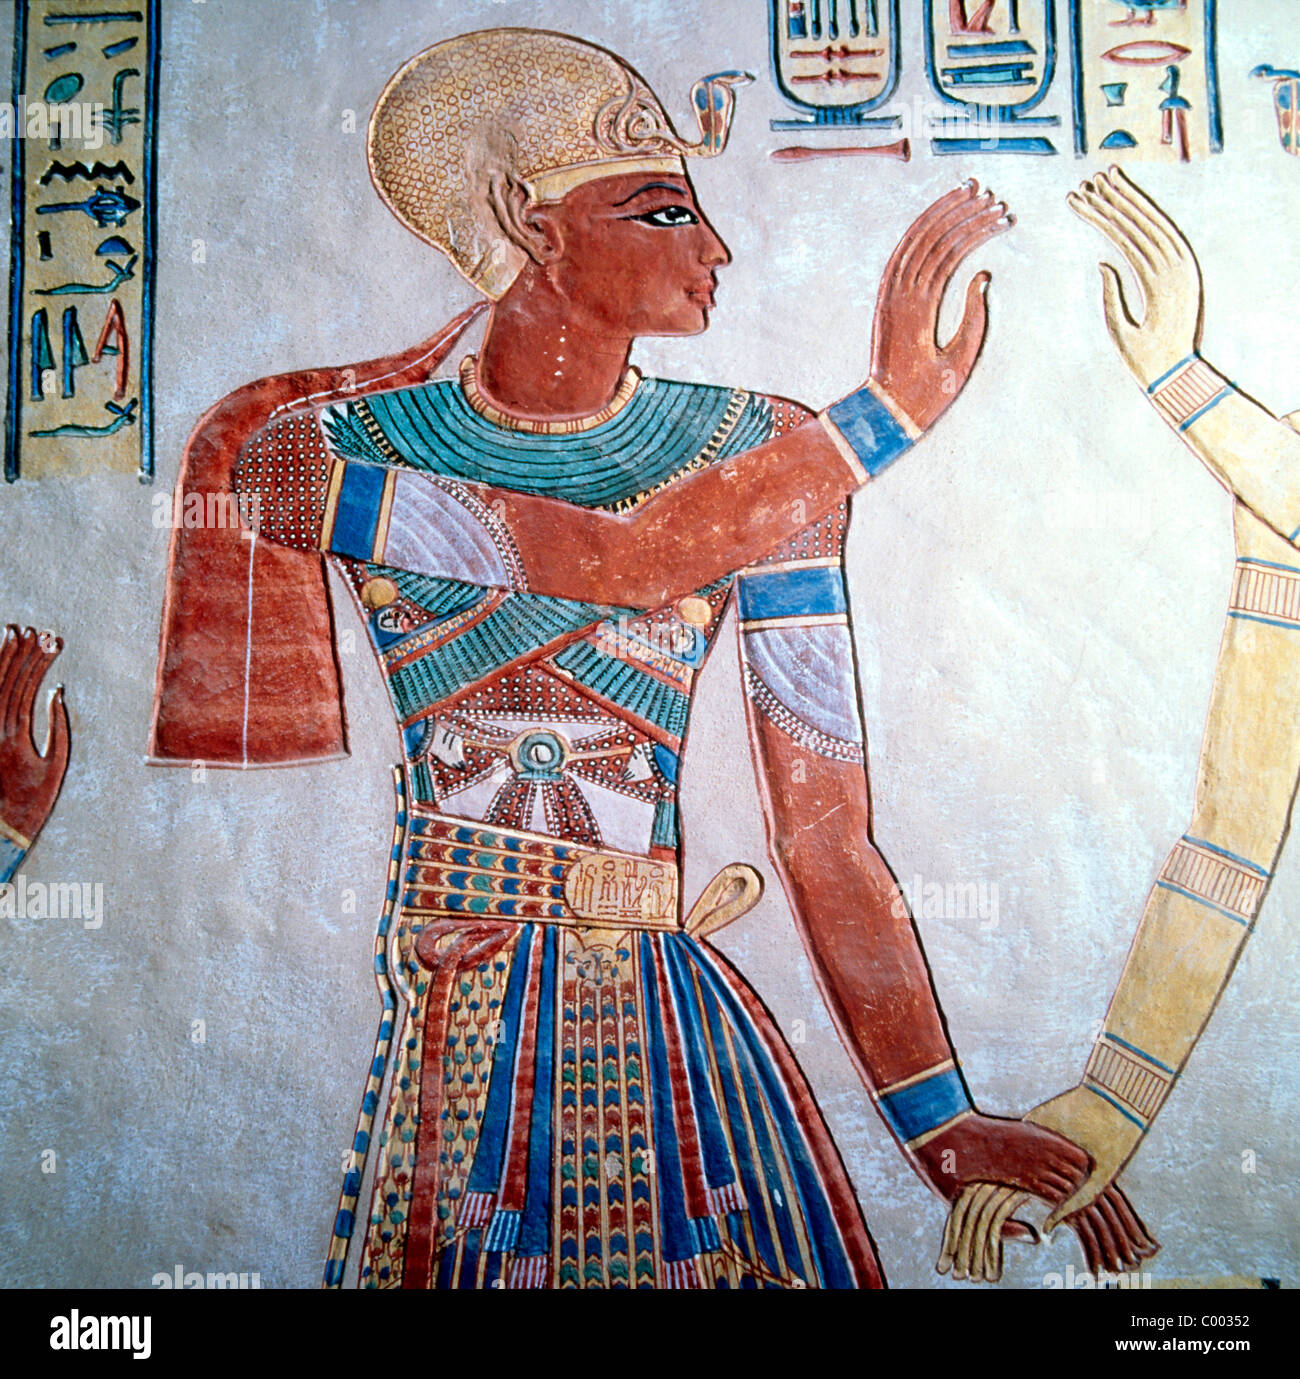 Ancient Egyptian Wall Painting in the Tomb of Prince Amon-kopshef,  Valley of the Queens, Luxor, Nile Valley, Egypt Stock Photo